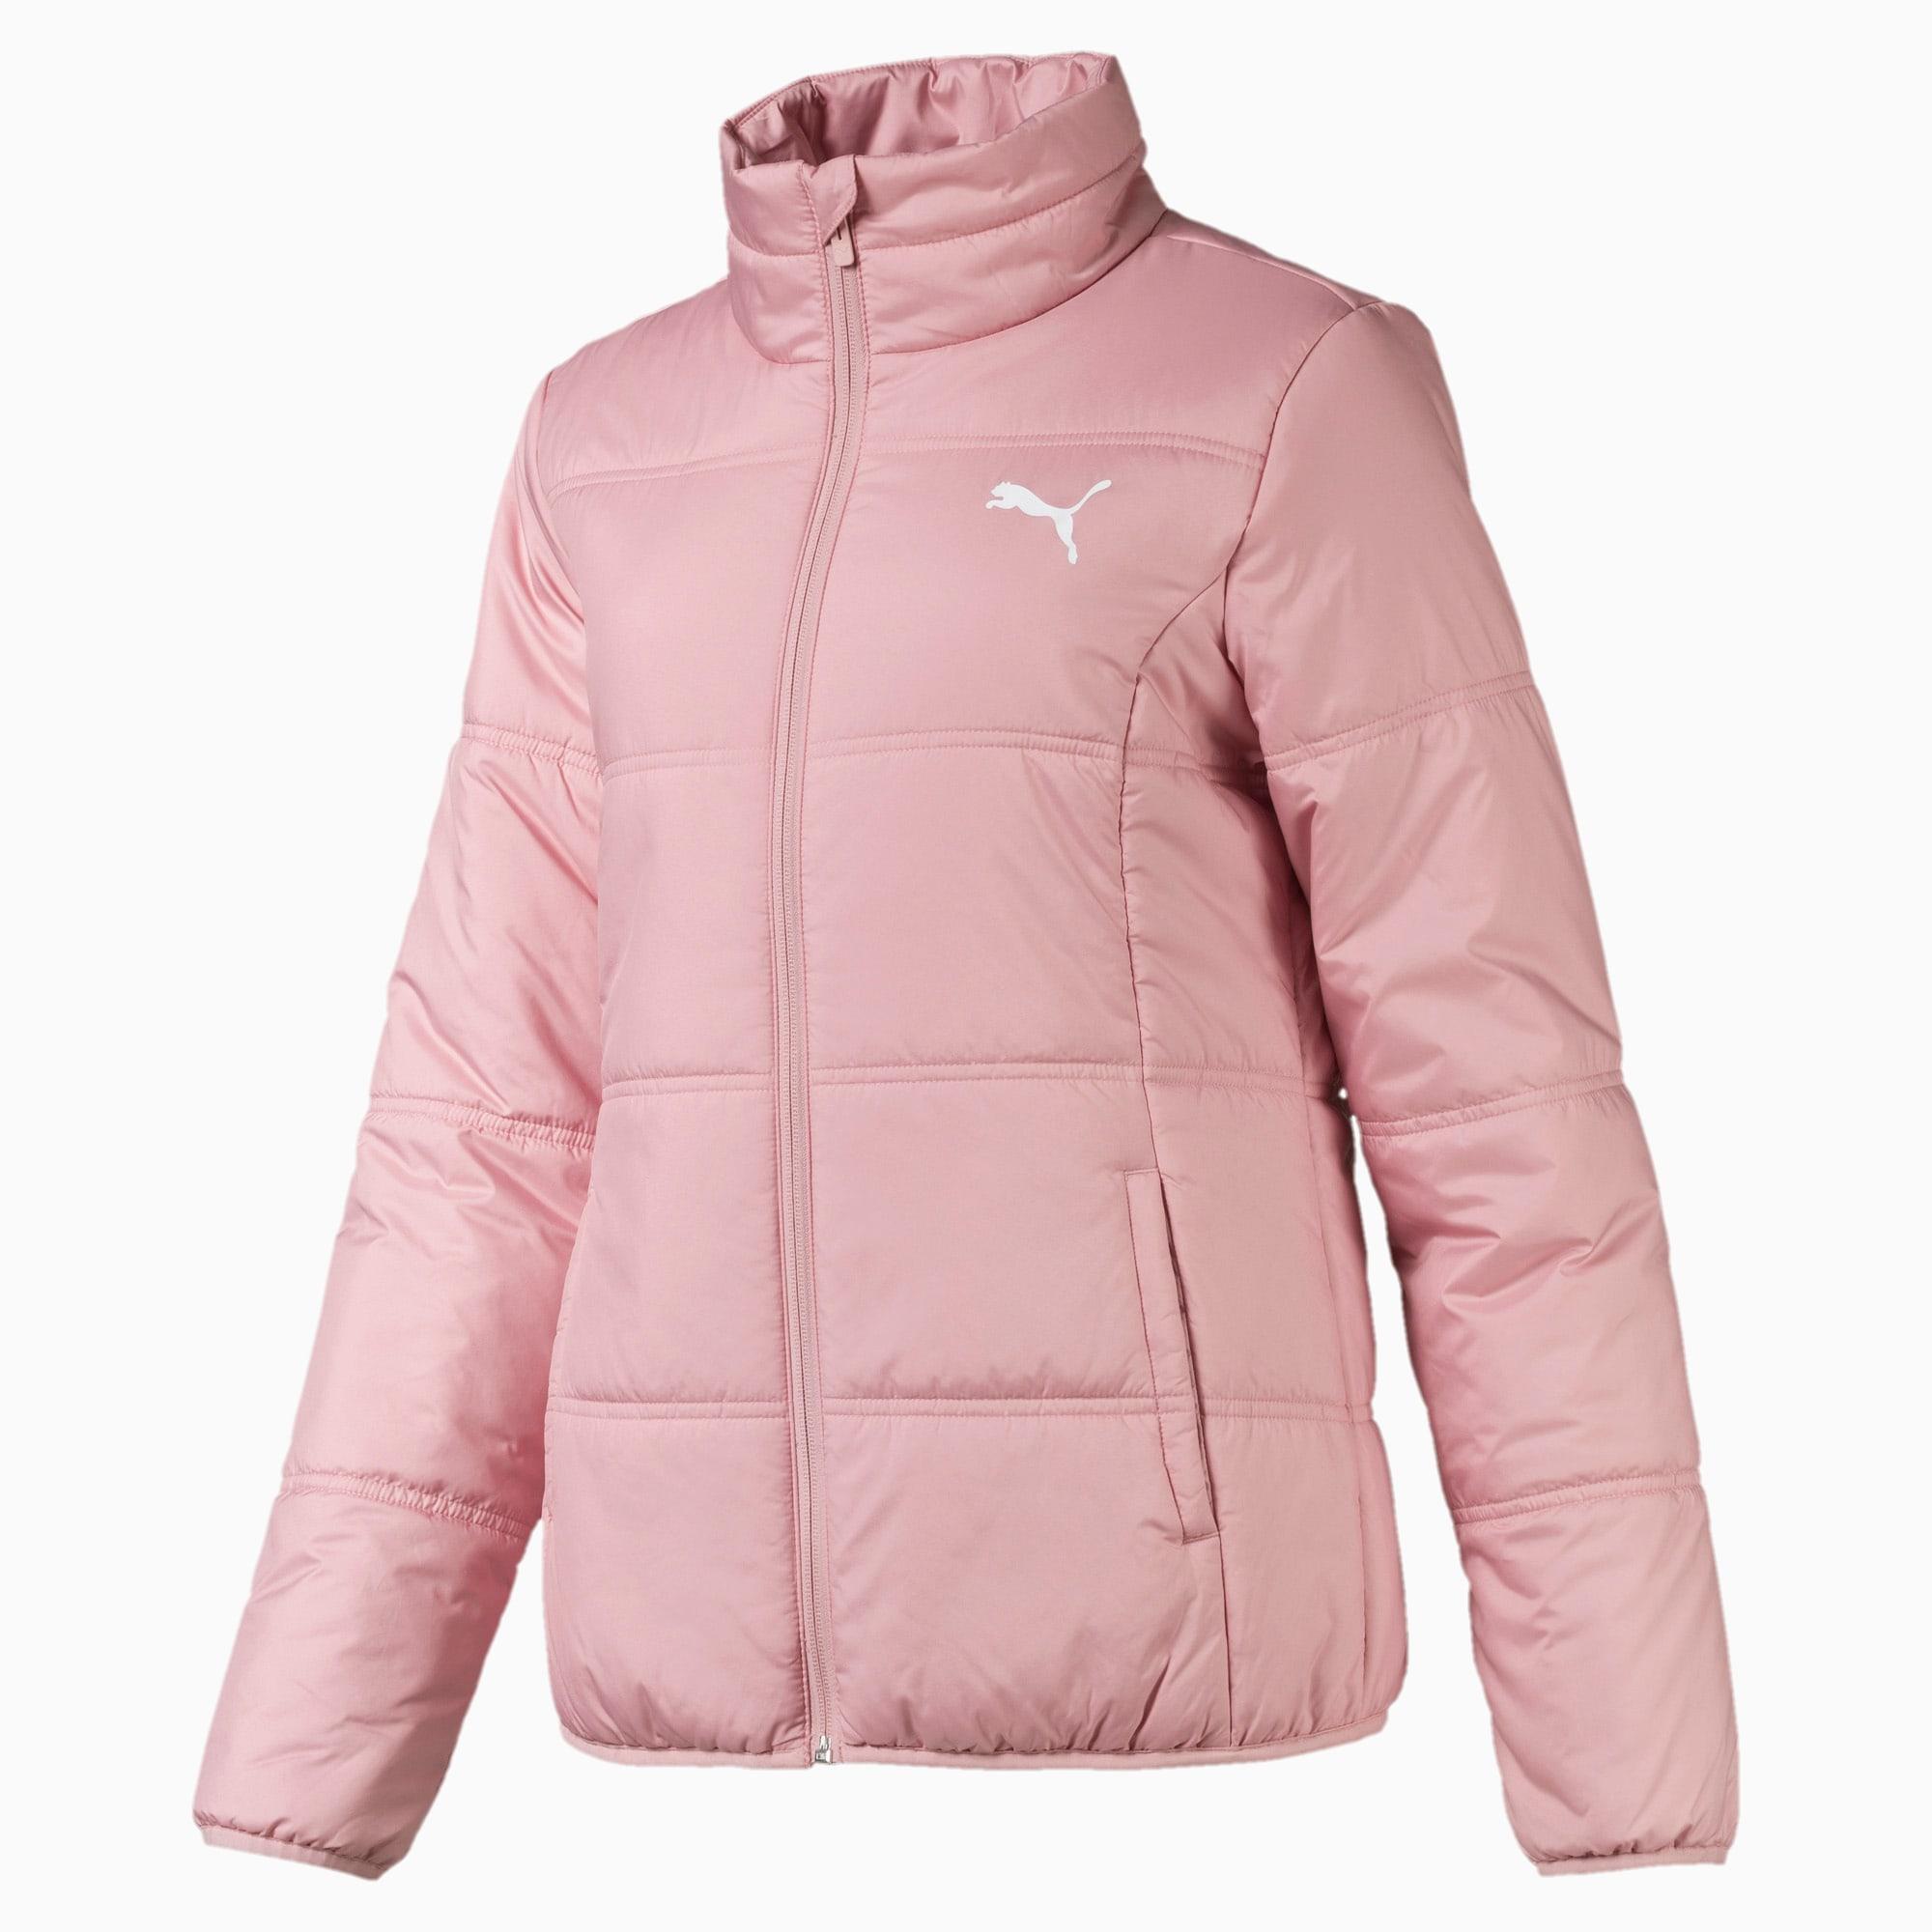 PUMA Synthetic Essentials Women's Padded Jacket in Pink - Lyst